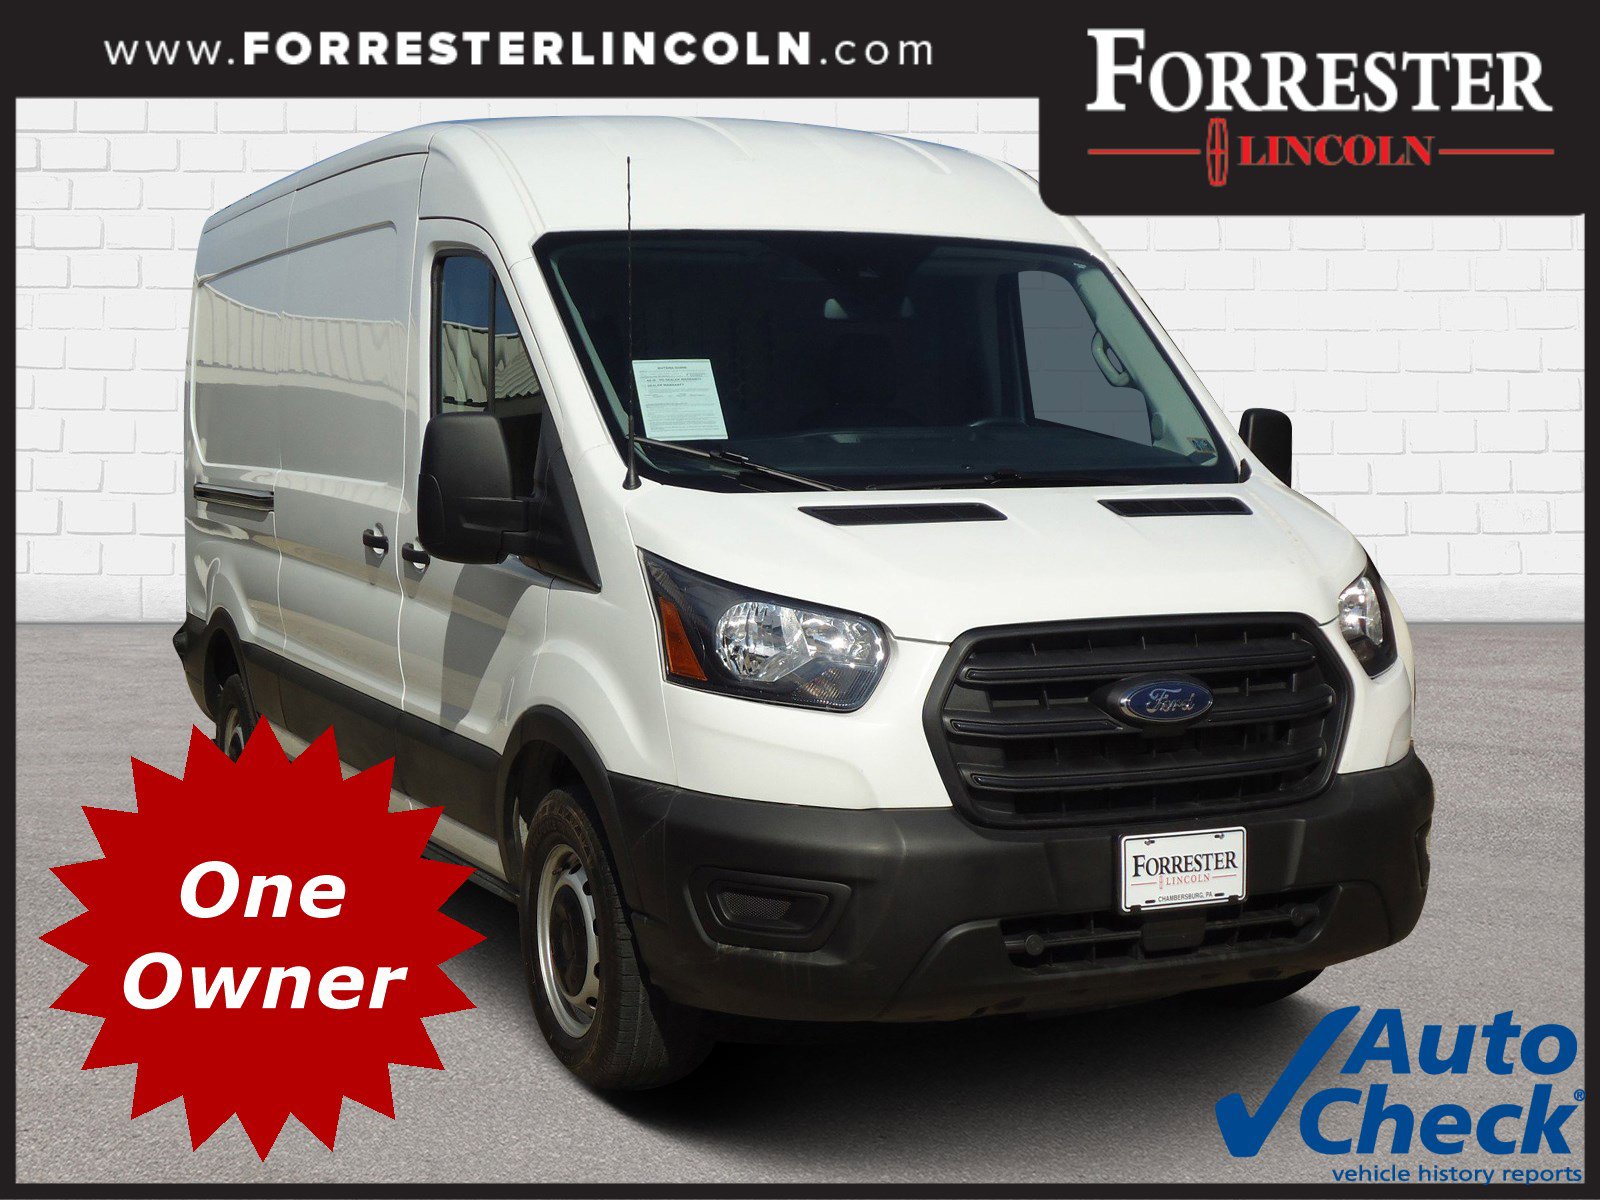 Used Ford Transit Vans For Sale in Chambersburg, PA